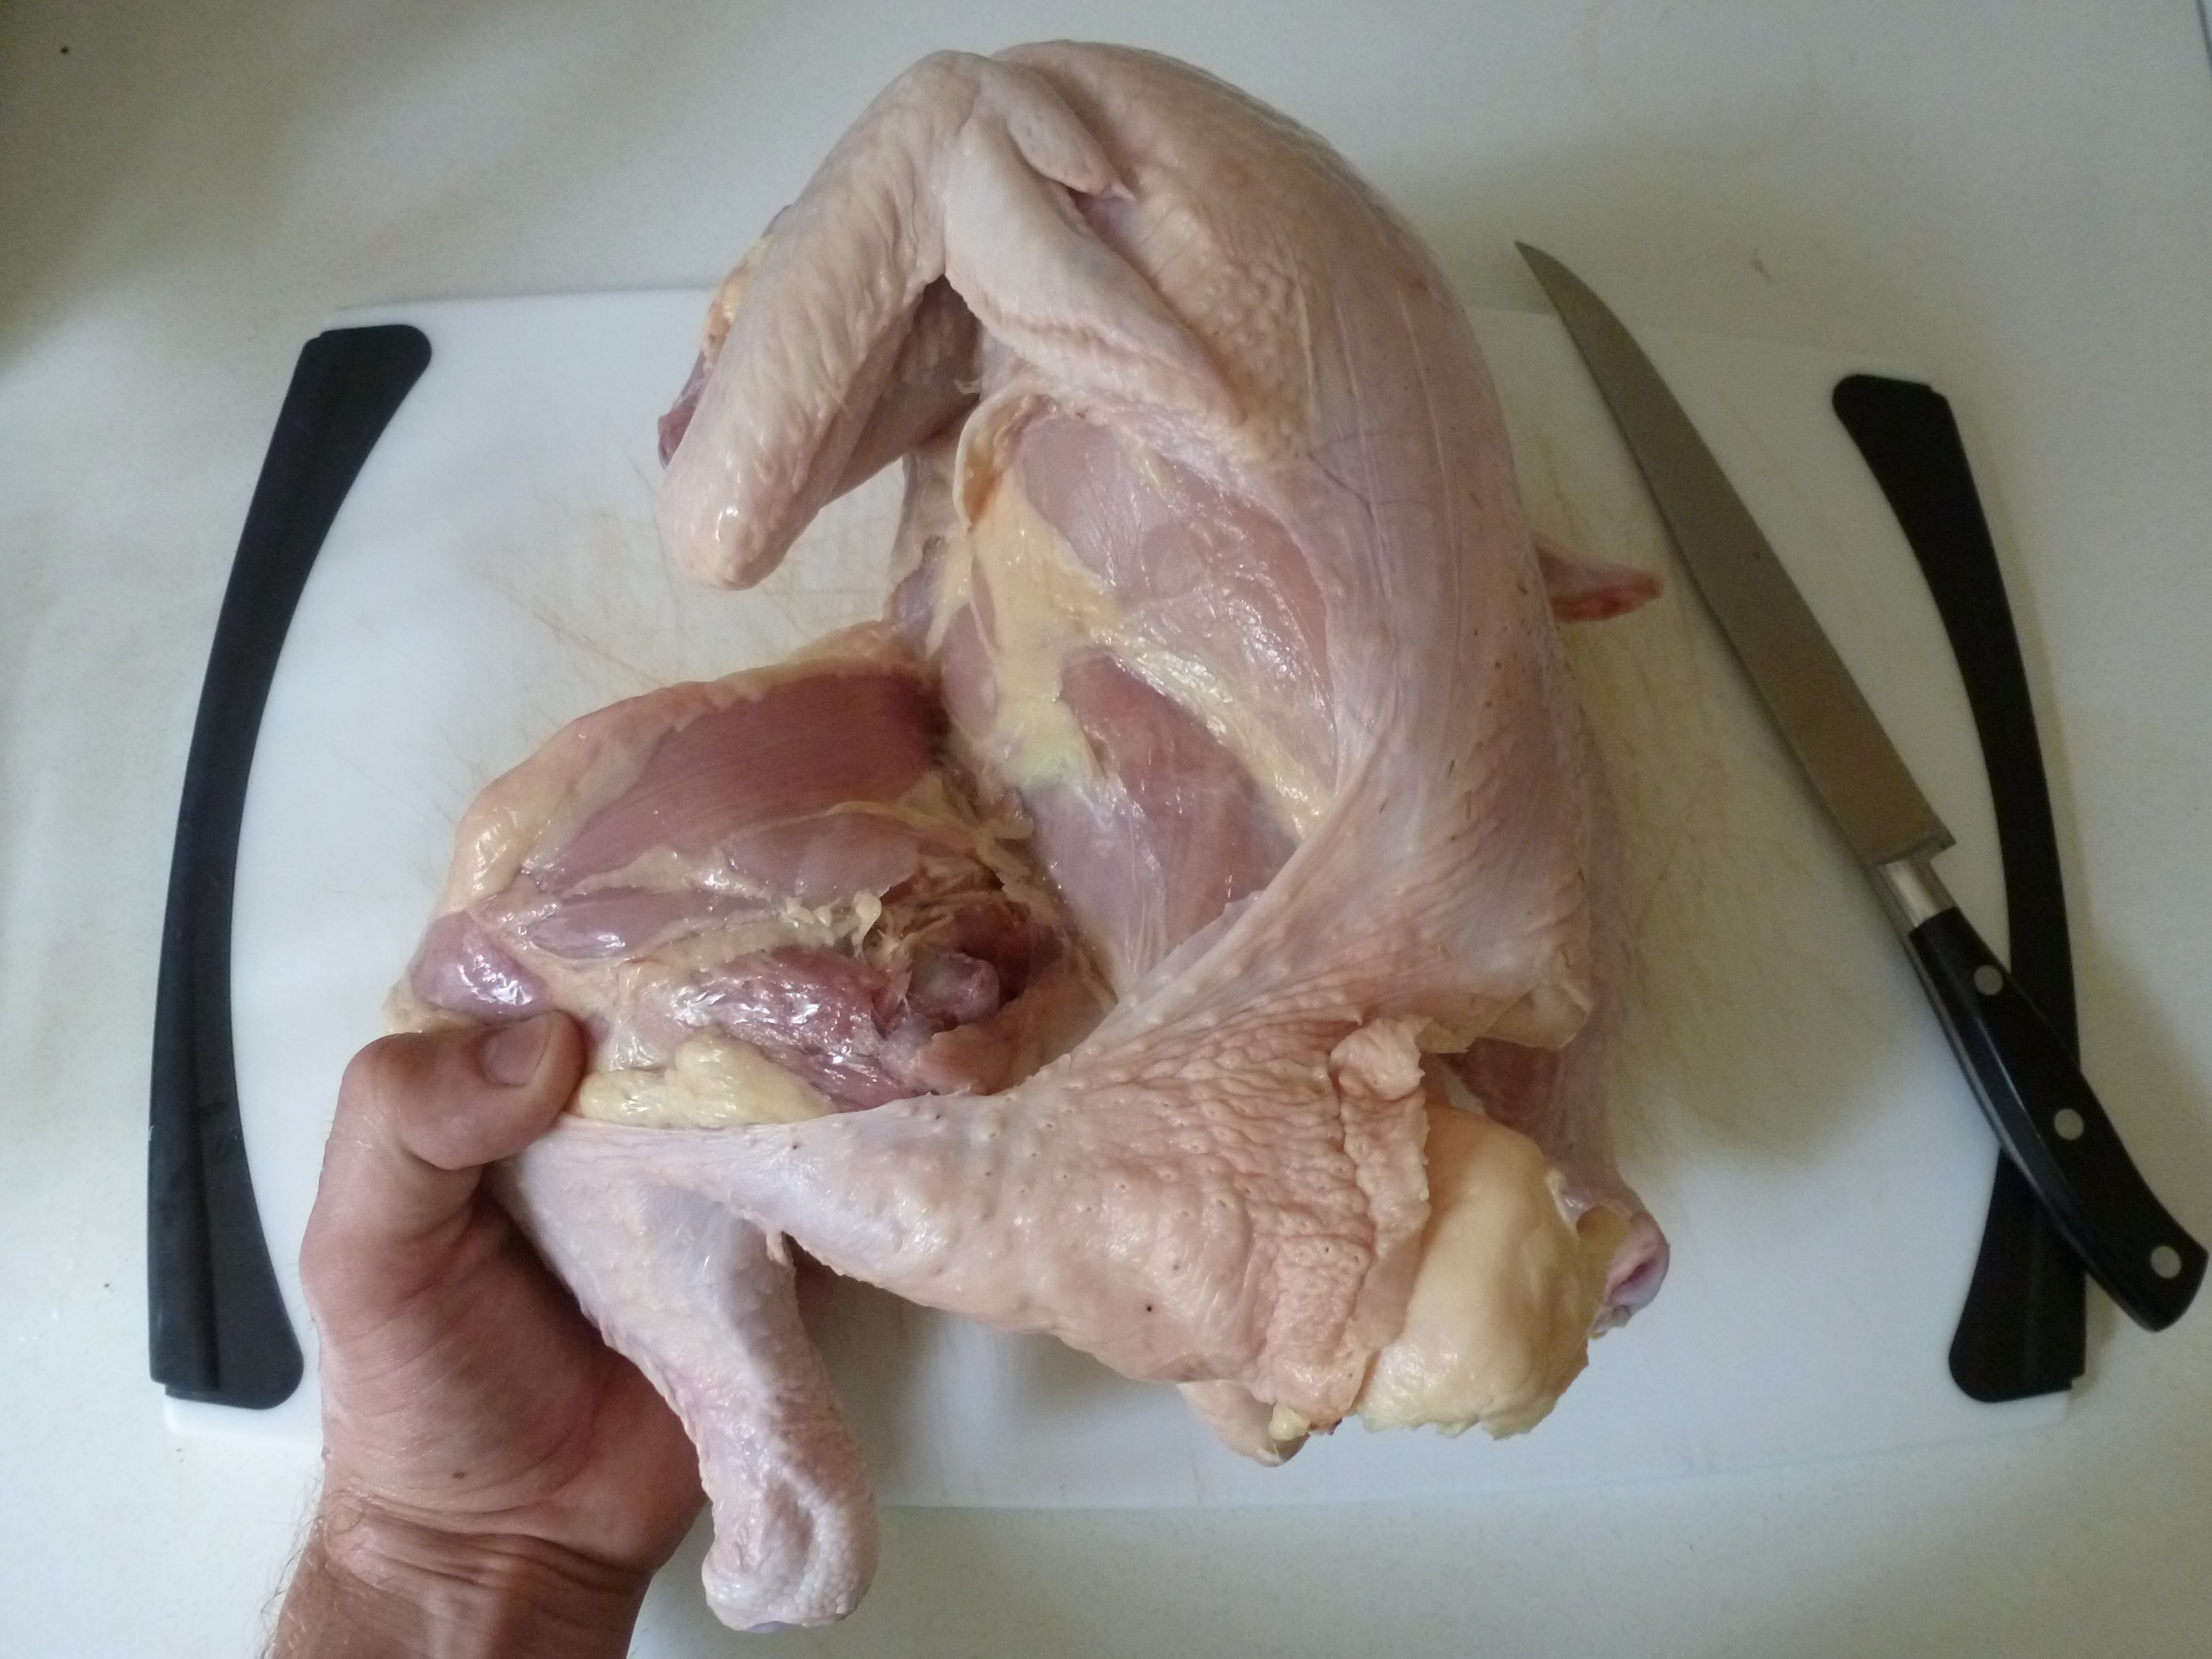 Bending the leg of the chicken back to pop it out of its socket